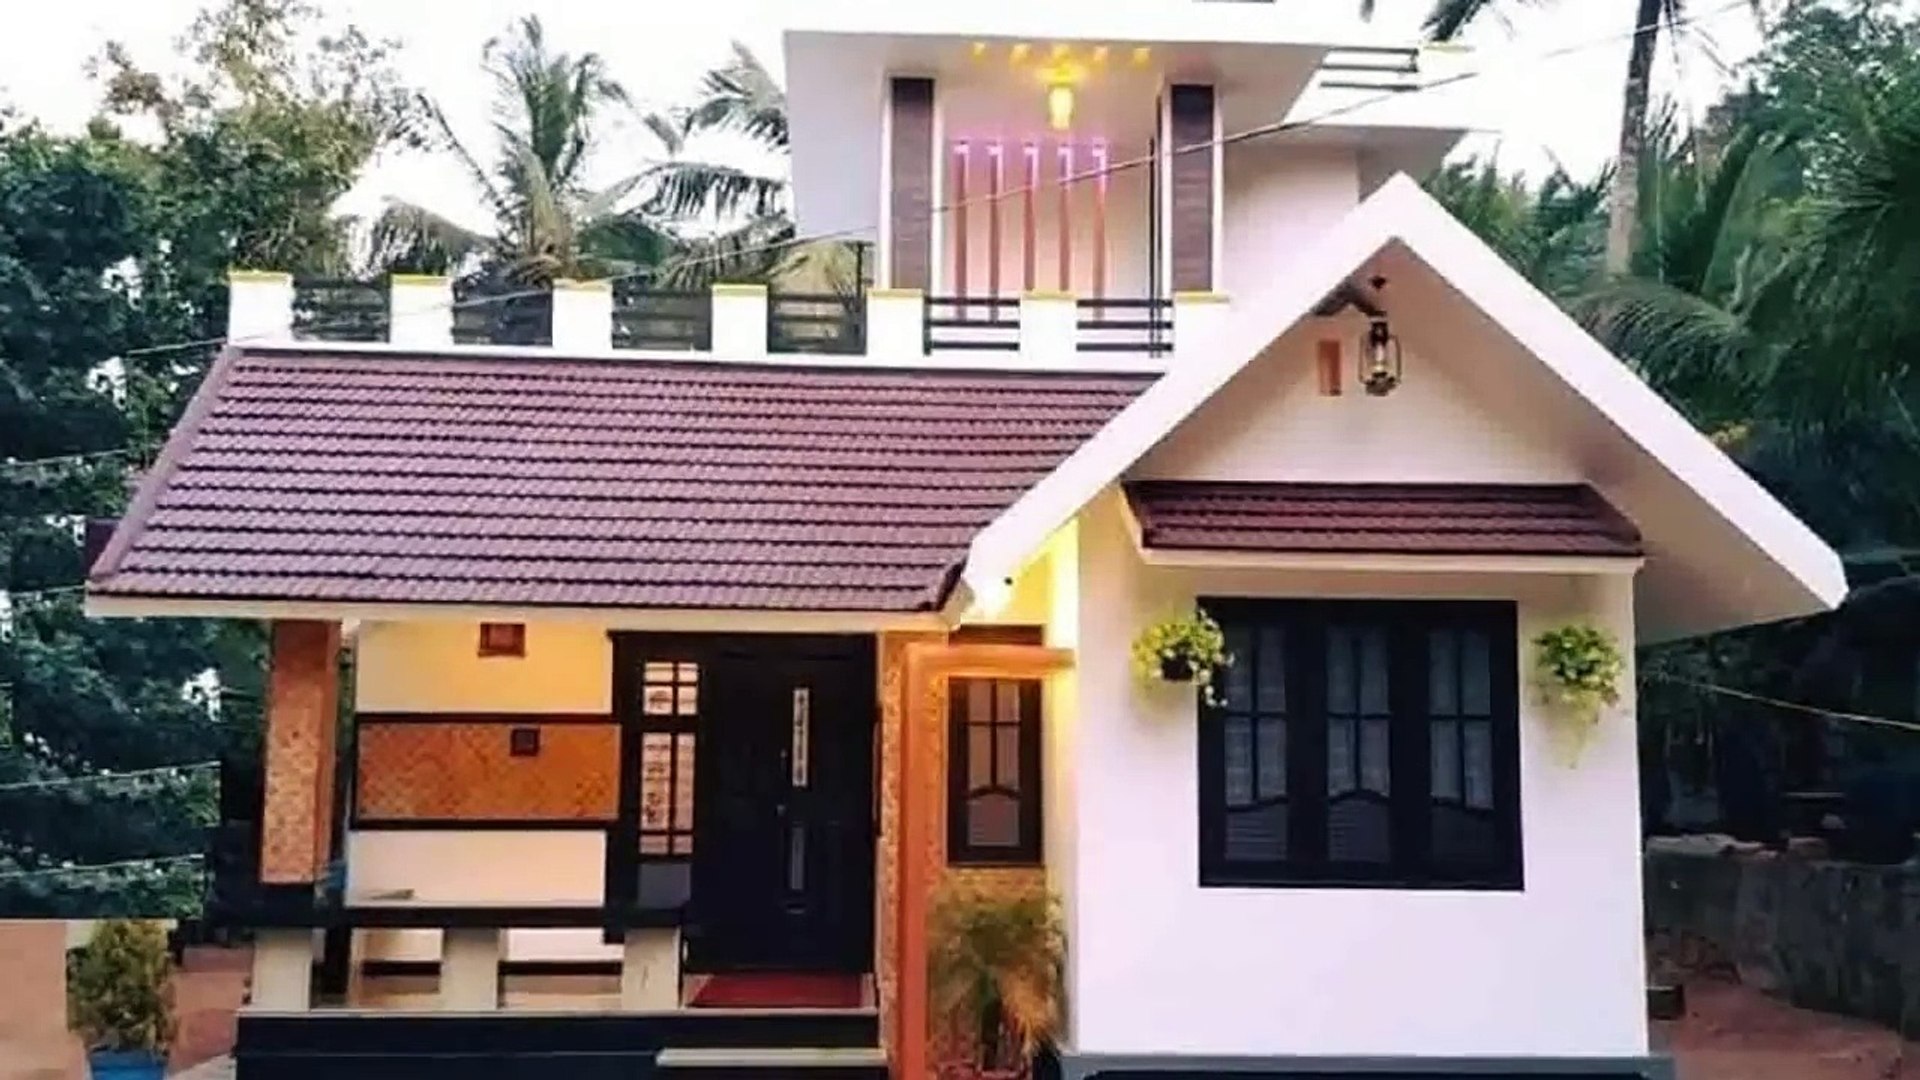 Cute Modern House 800 Sft Budget 5 Lakh Elevation Interiors 1 Video Dailymotion